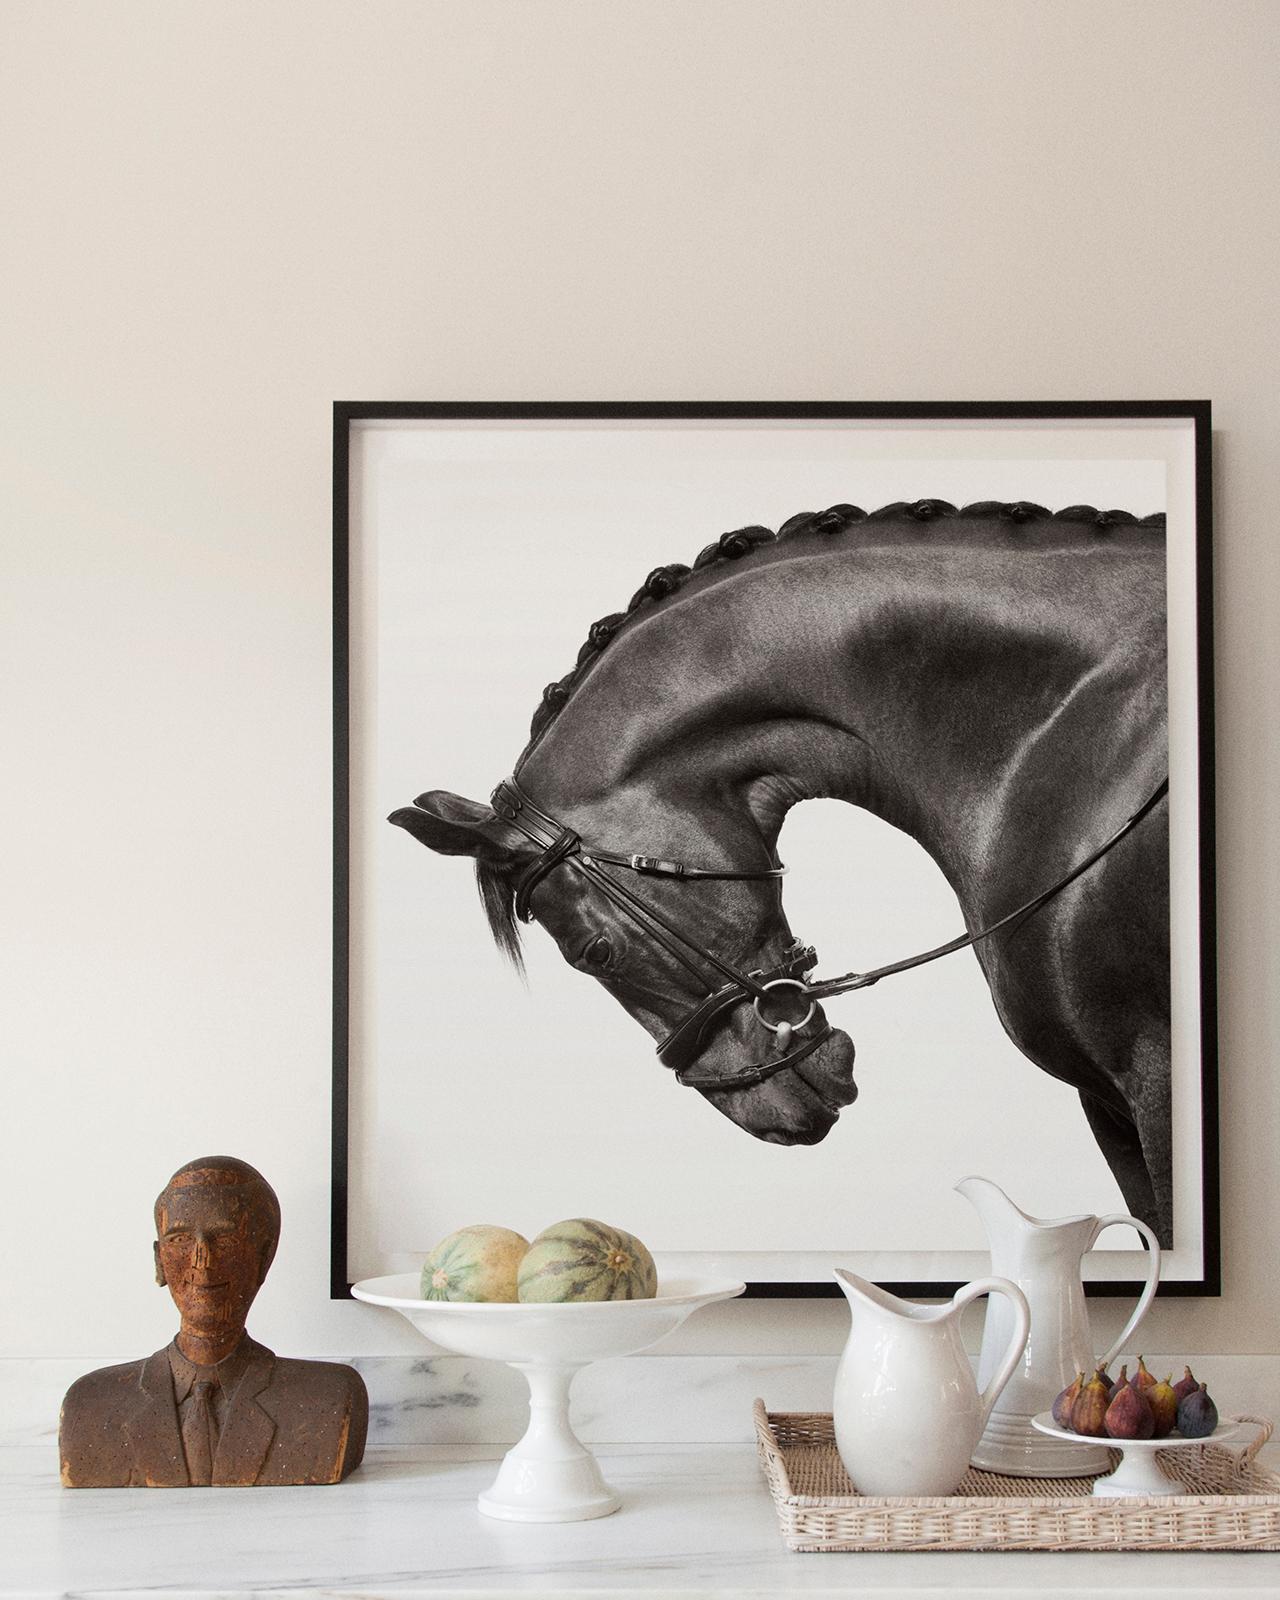 Equestrian Portrait of a Speckled Horse, Fashion-Inspired, Horizontal - Contemporary Photograph by Drew Doggett